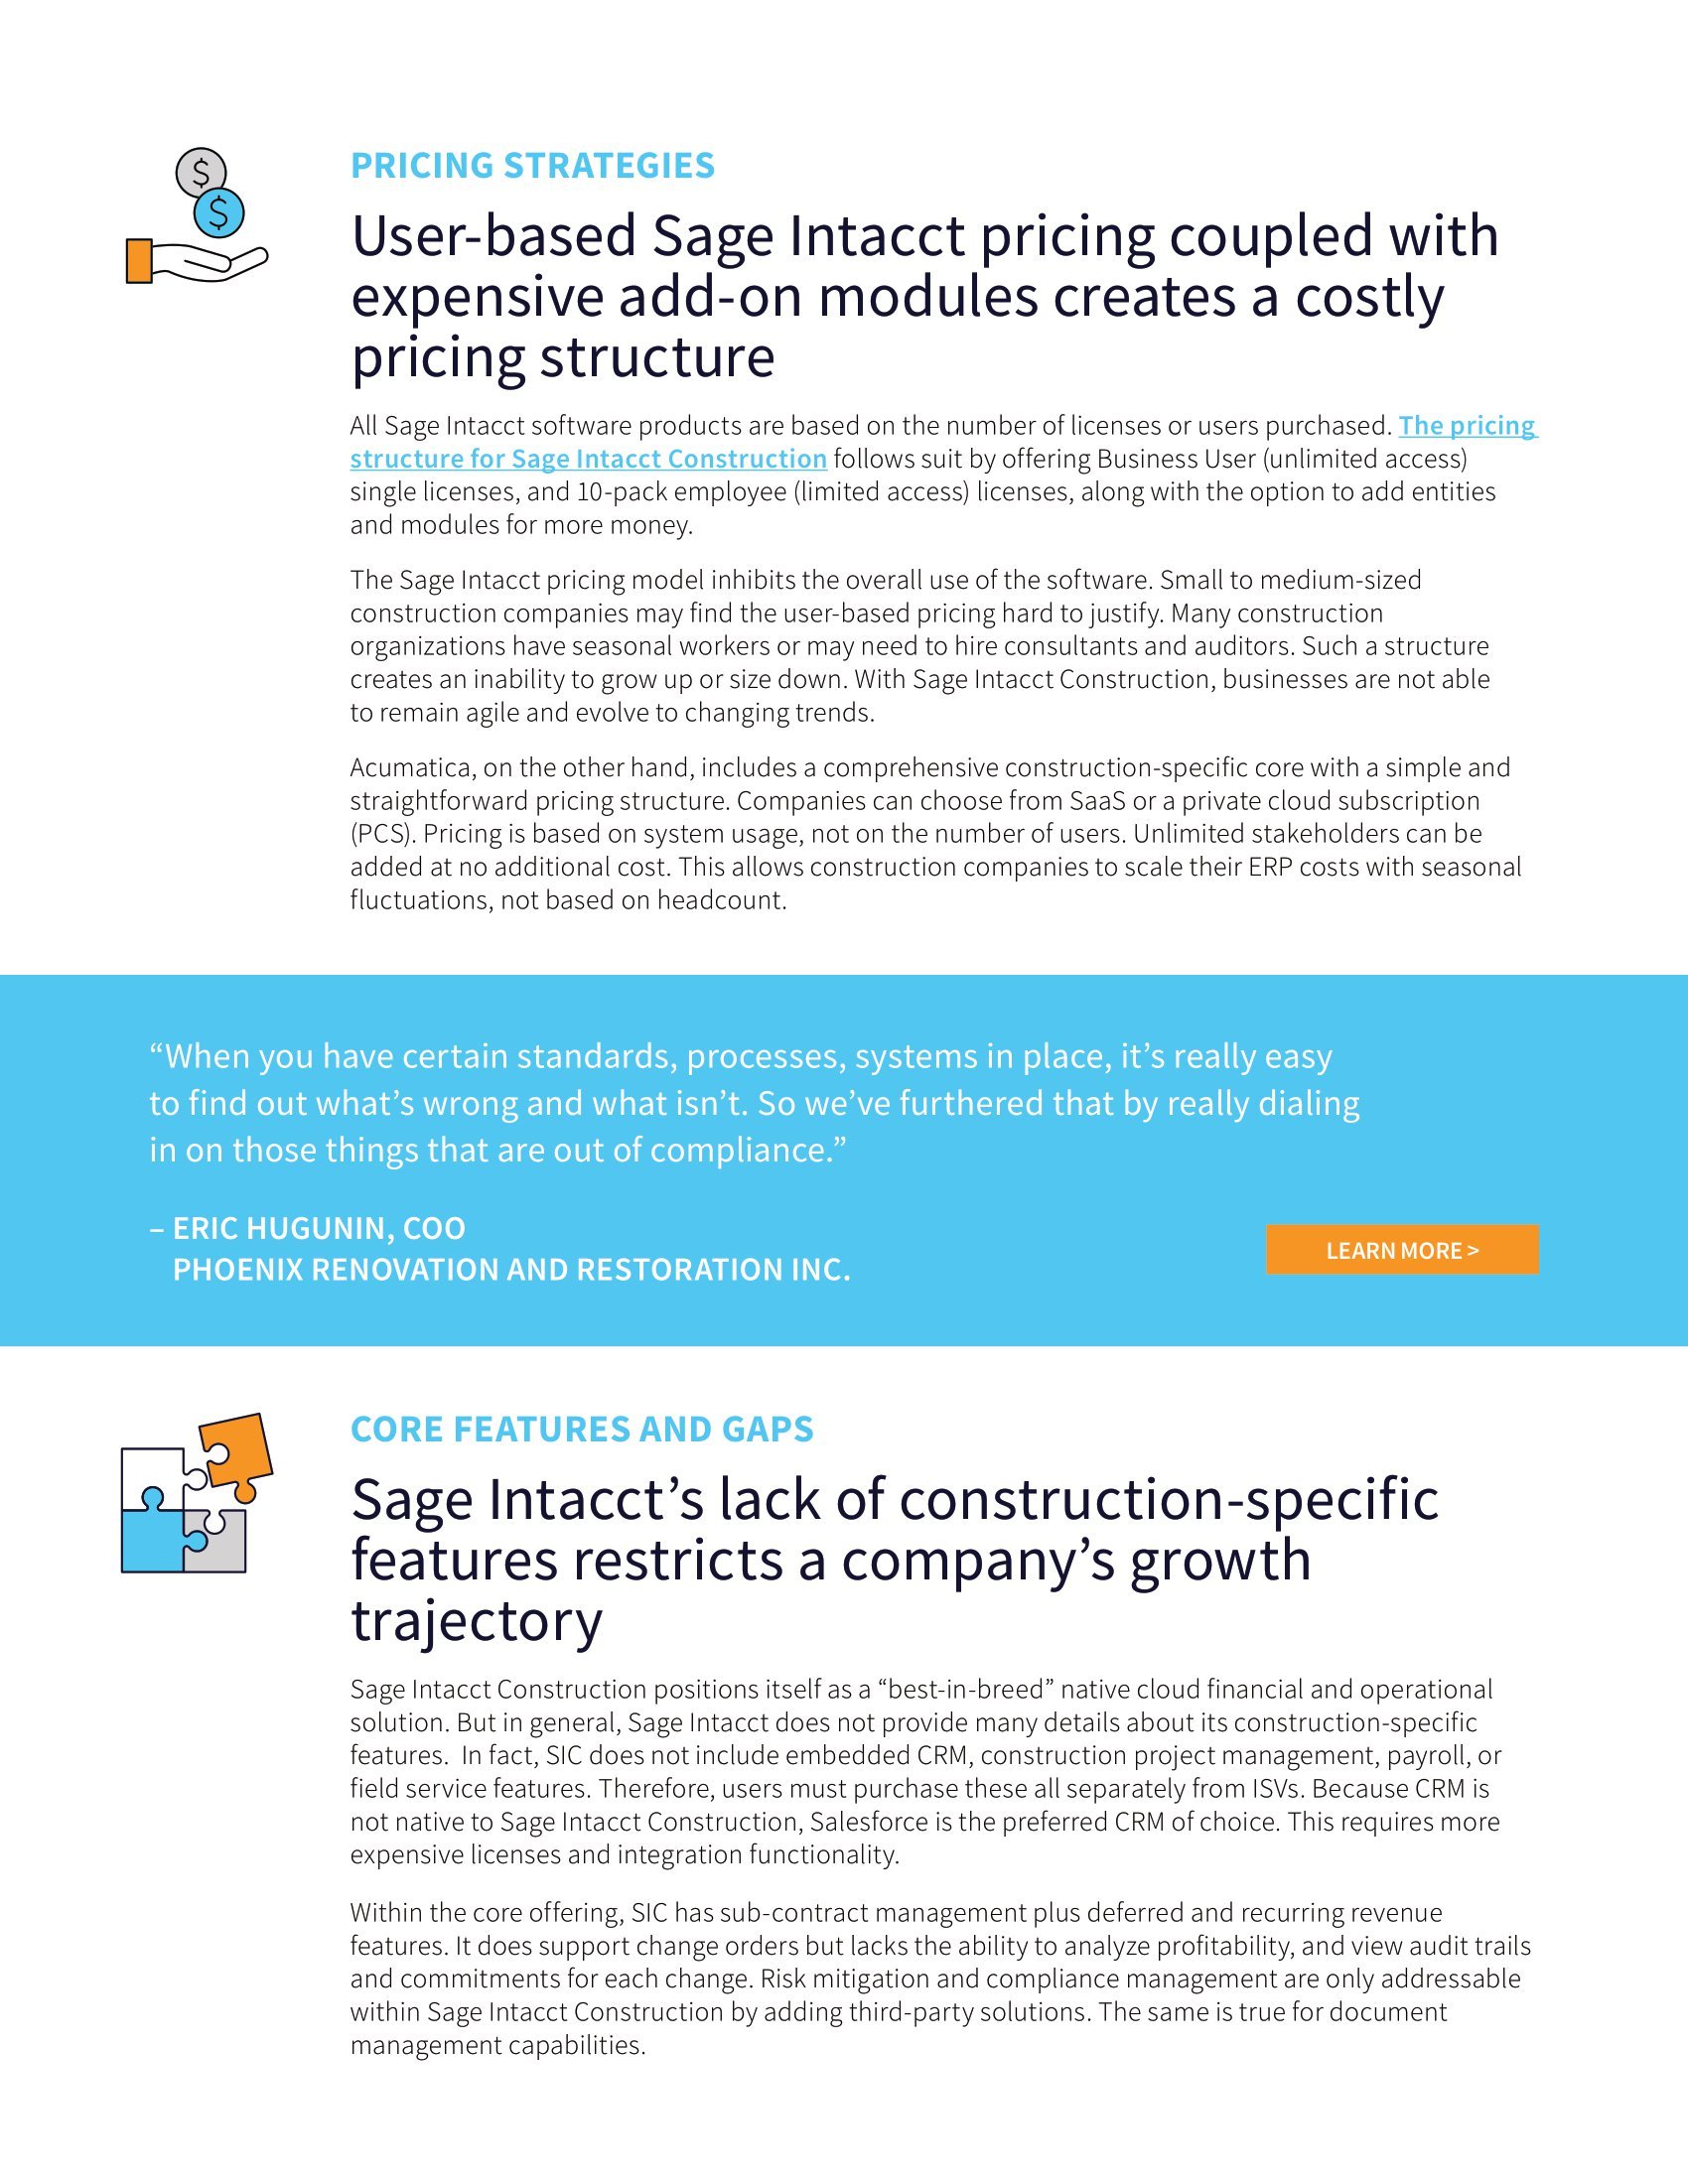 Comparing Acumatica Construction Edition to Sage Intacct Construction, page 2